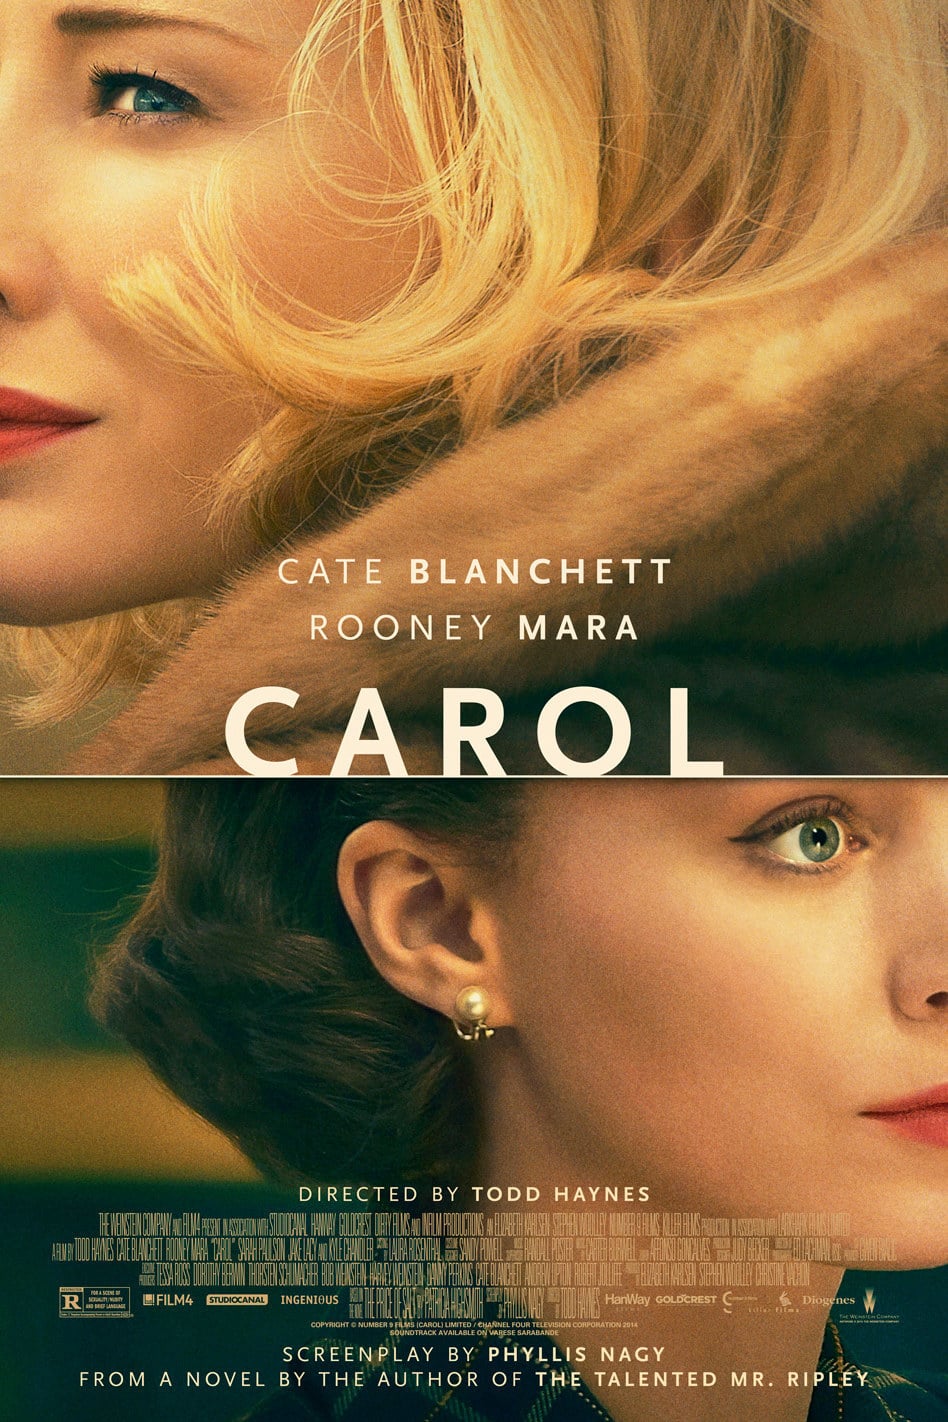 Carol 2 is finally here… - Blog - The Film Experience